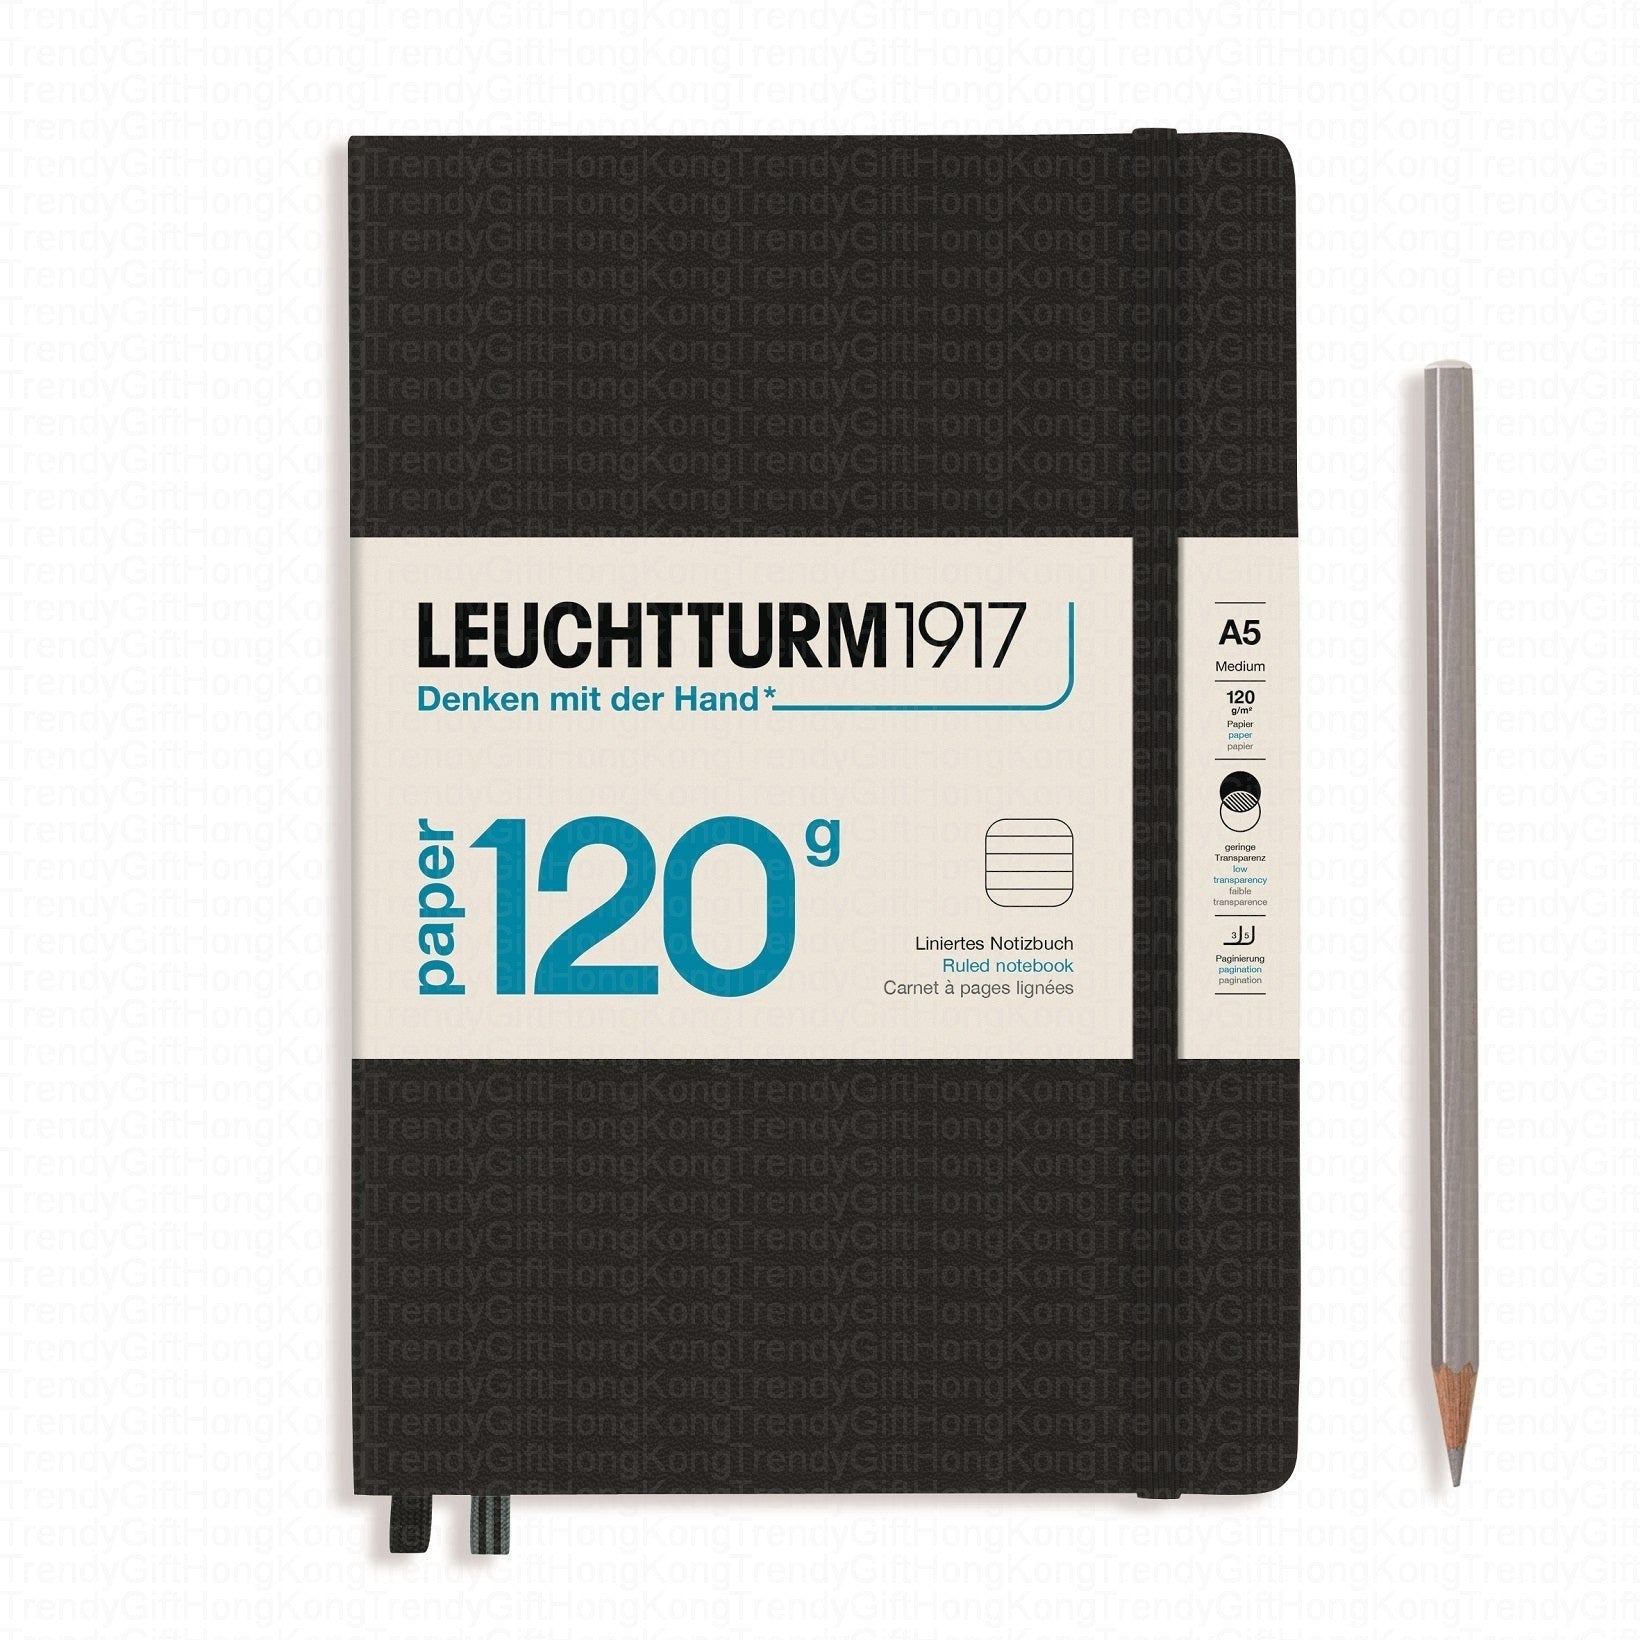 Leuchtturm 1917 120g Edition Notebook A5 , 203 Pages, Ruled/Lined, Black trendygifthk